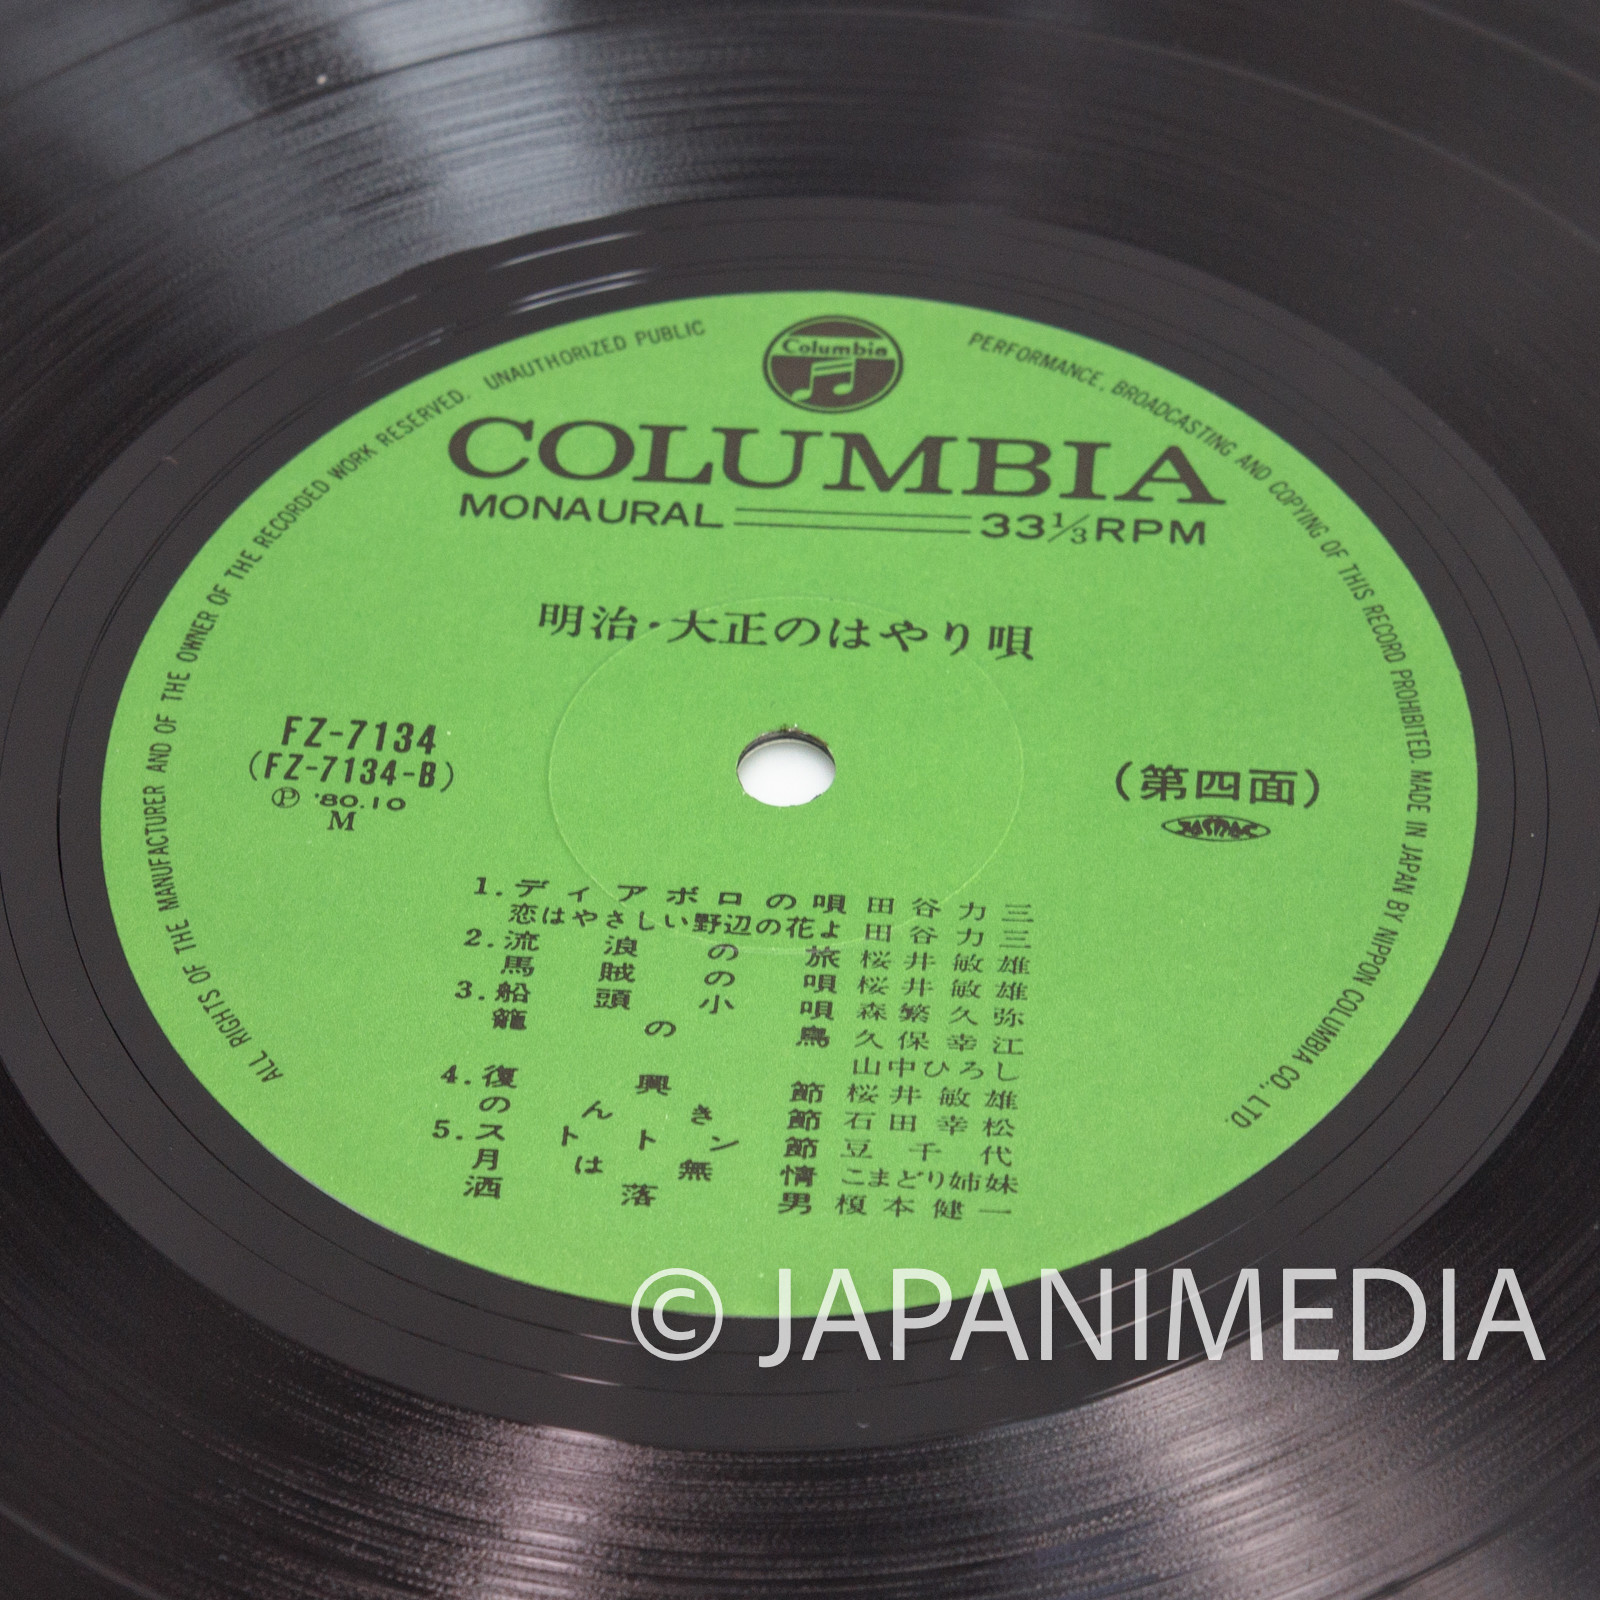 Popular songs of the Meiji and Taisho eras in JAPAN Vinyl 2LP Record FZ-7133/4